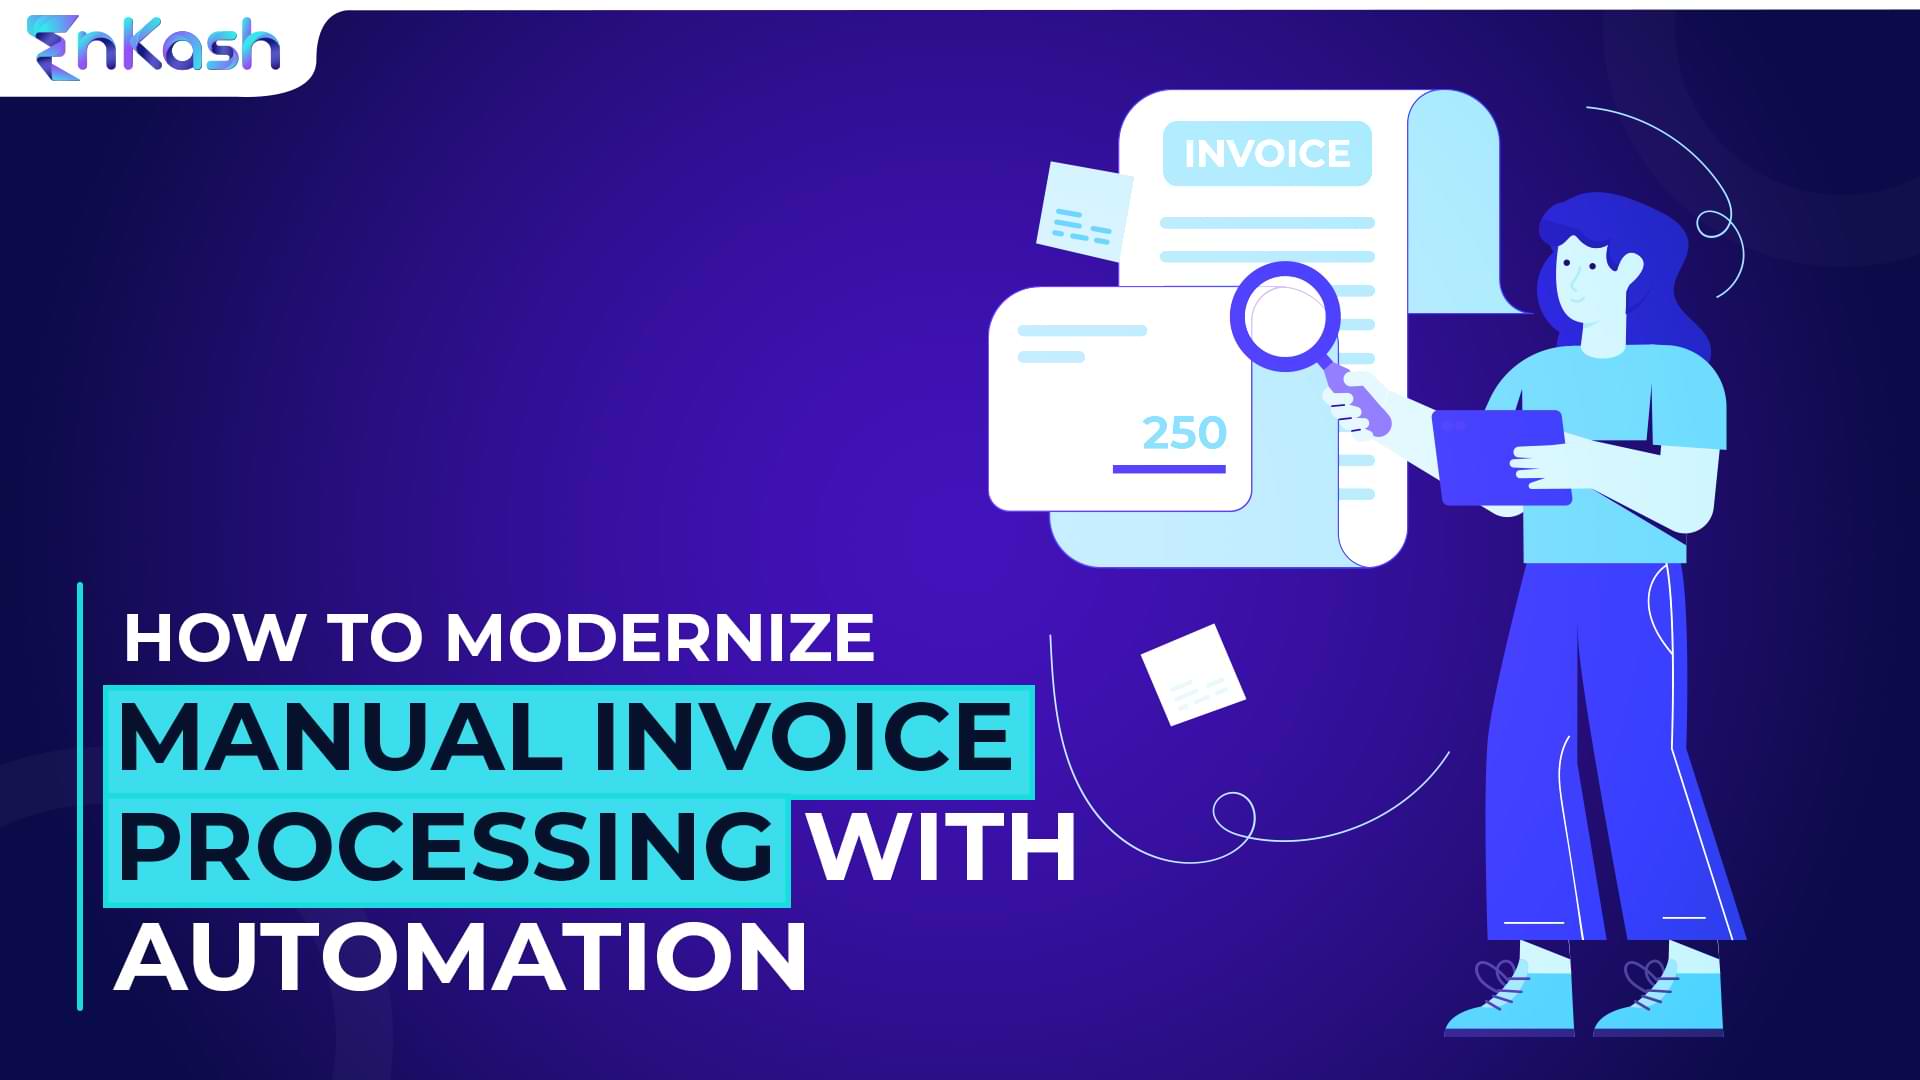 How to modernize manual invoice processing with automation